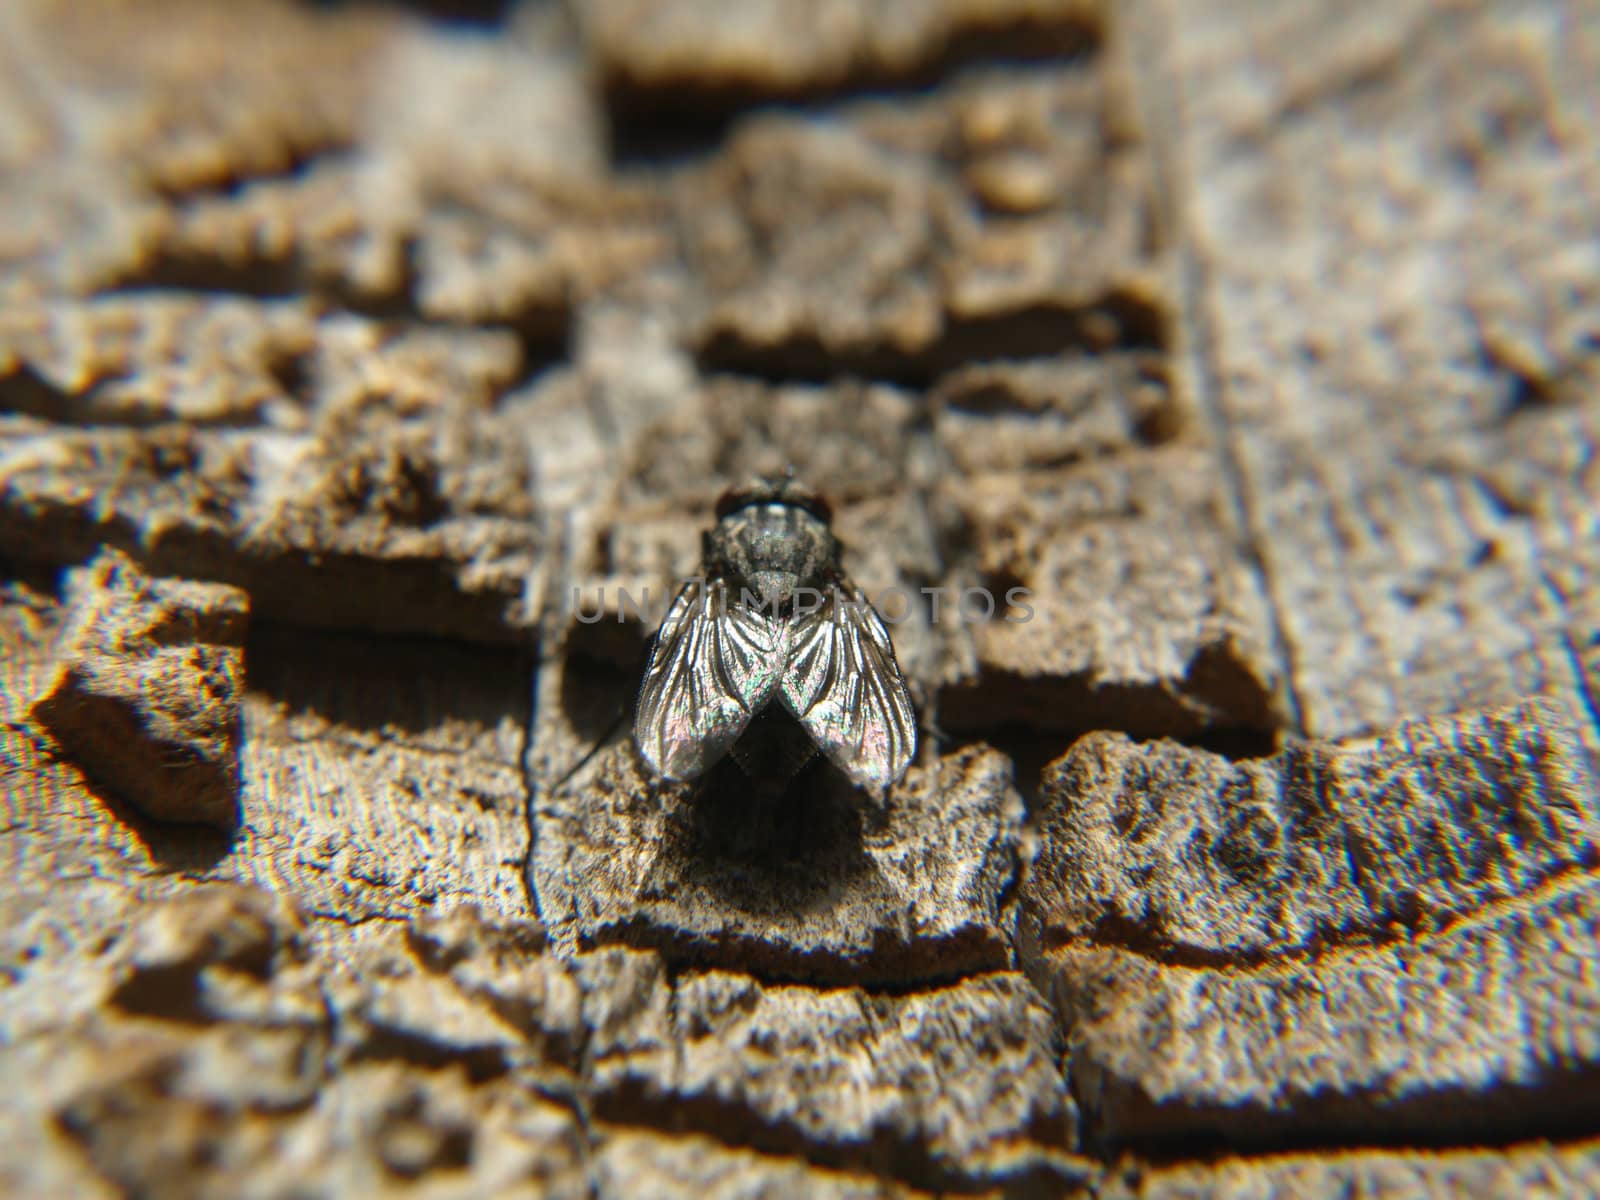 A fly sitting on the bark of a tree